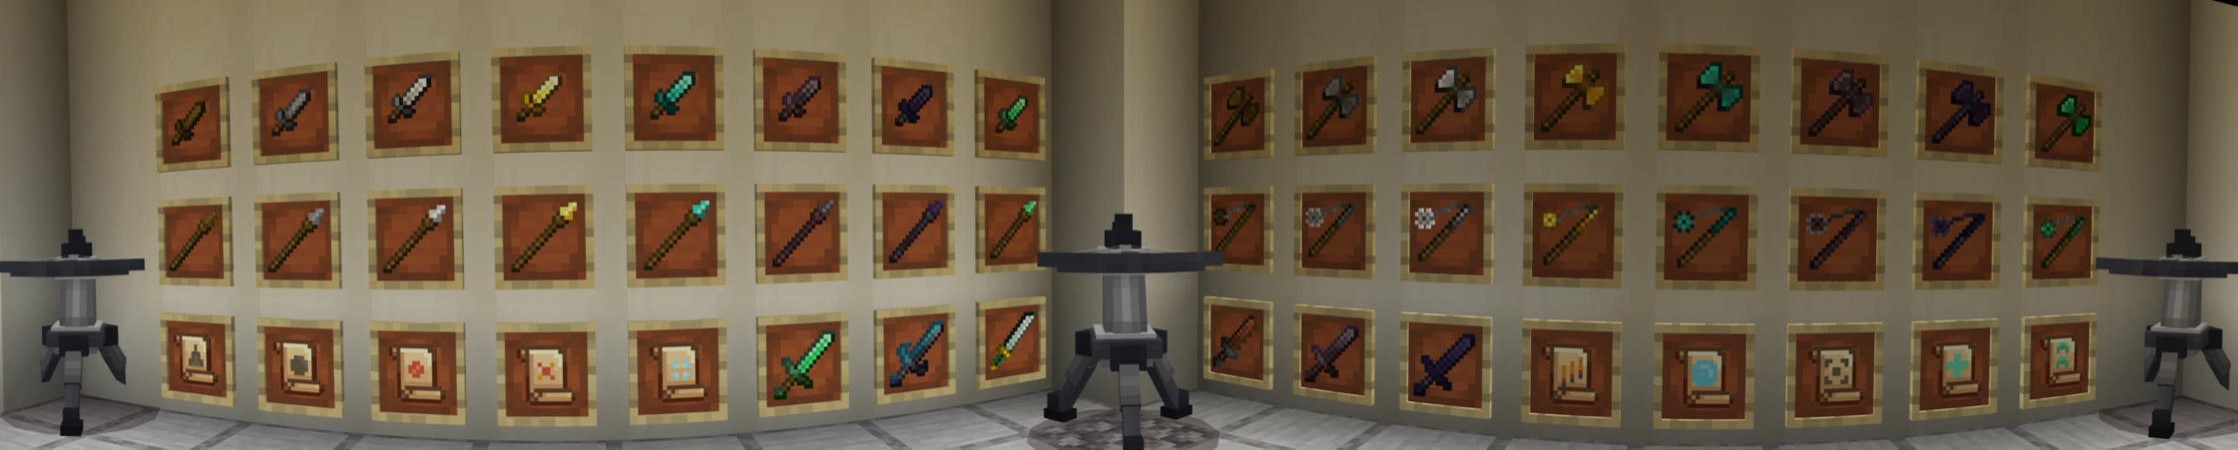 Weapons Expansion In Minecraft Marketplace Minecraft